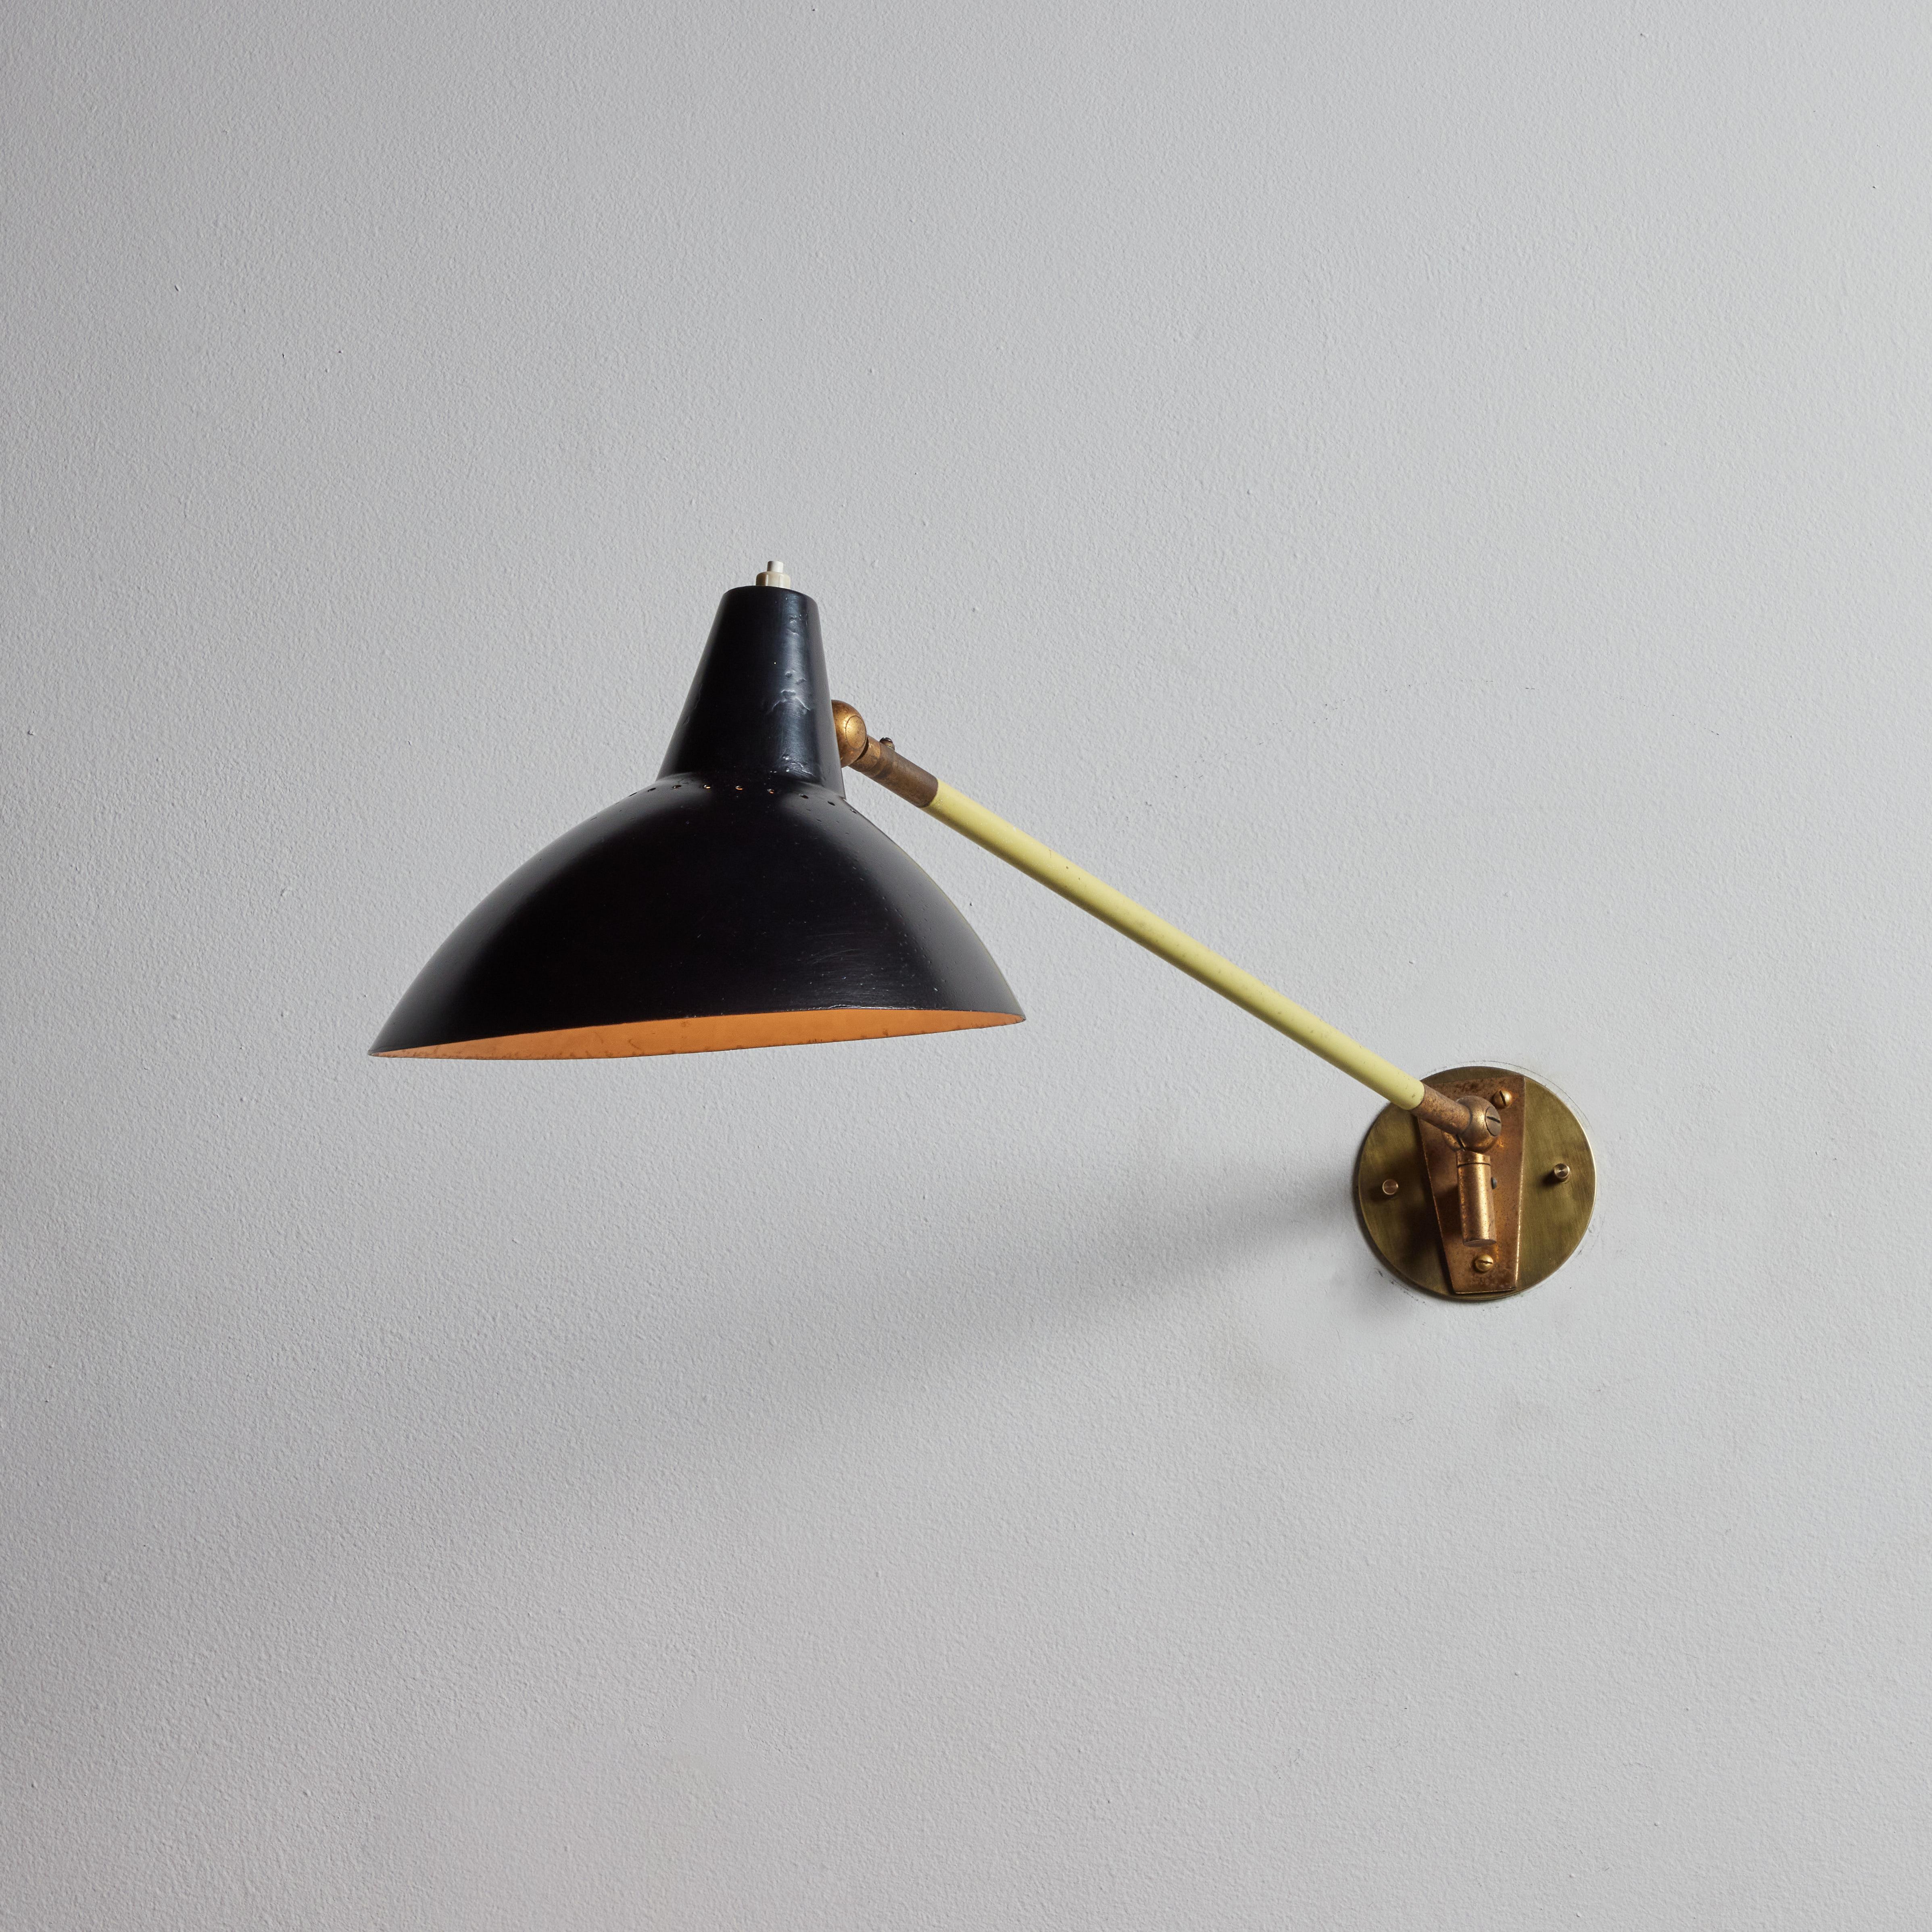 Single wall light by Stilnovo. Manufactured in Italy, circa 1950's. Enameled metal, brass. Rewired for U.S. standards. Shade adjust to various positions, arm adjust up/down. We recommend one E27 75w maximum bulb. Bulbs provided as a one time